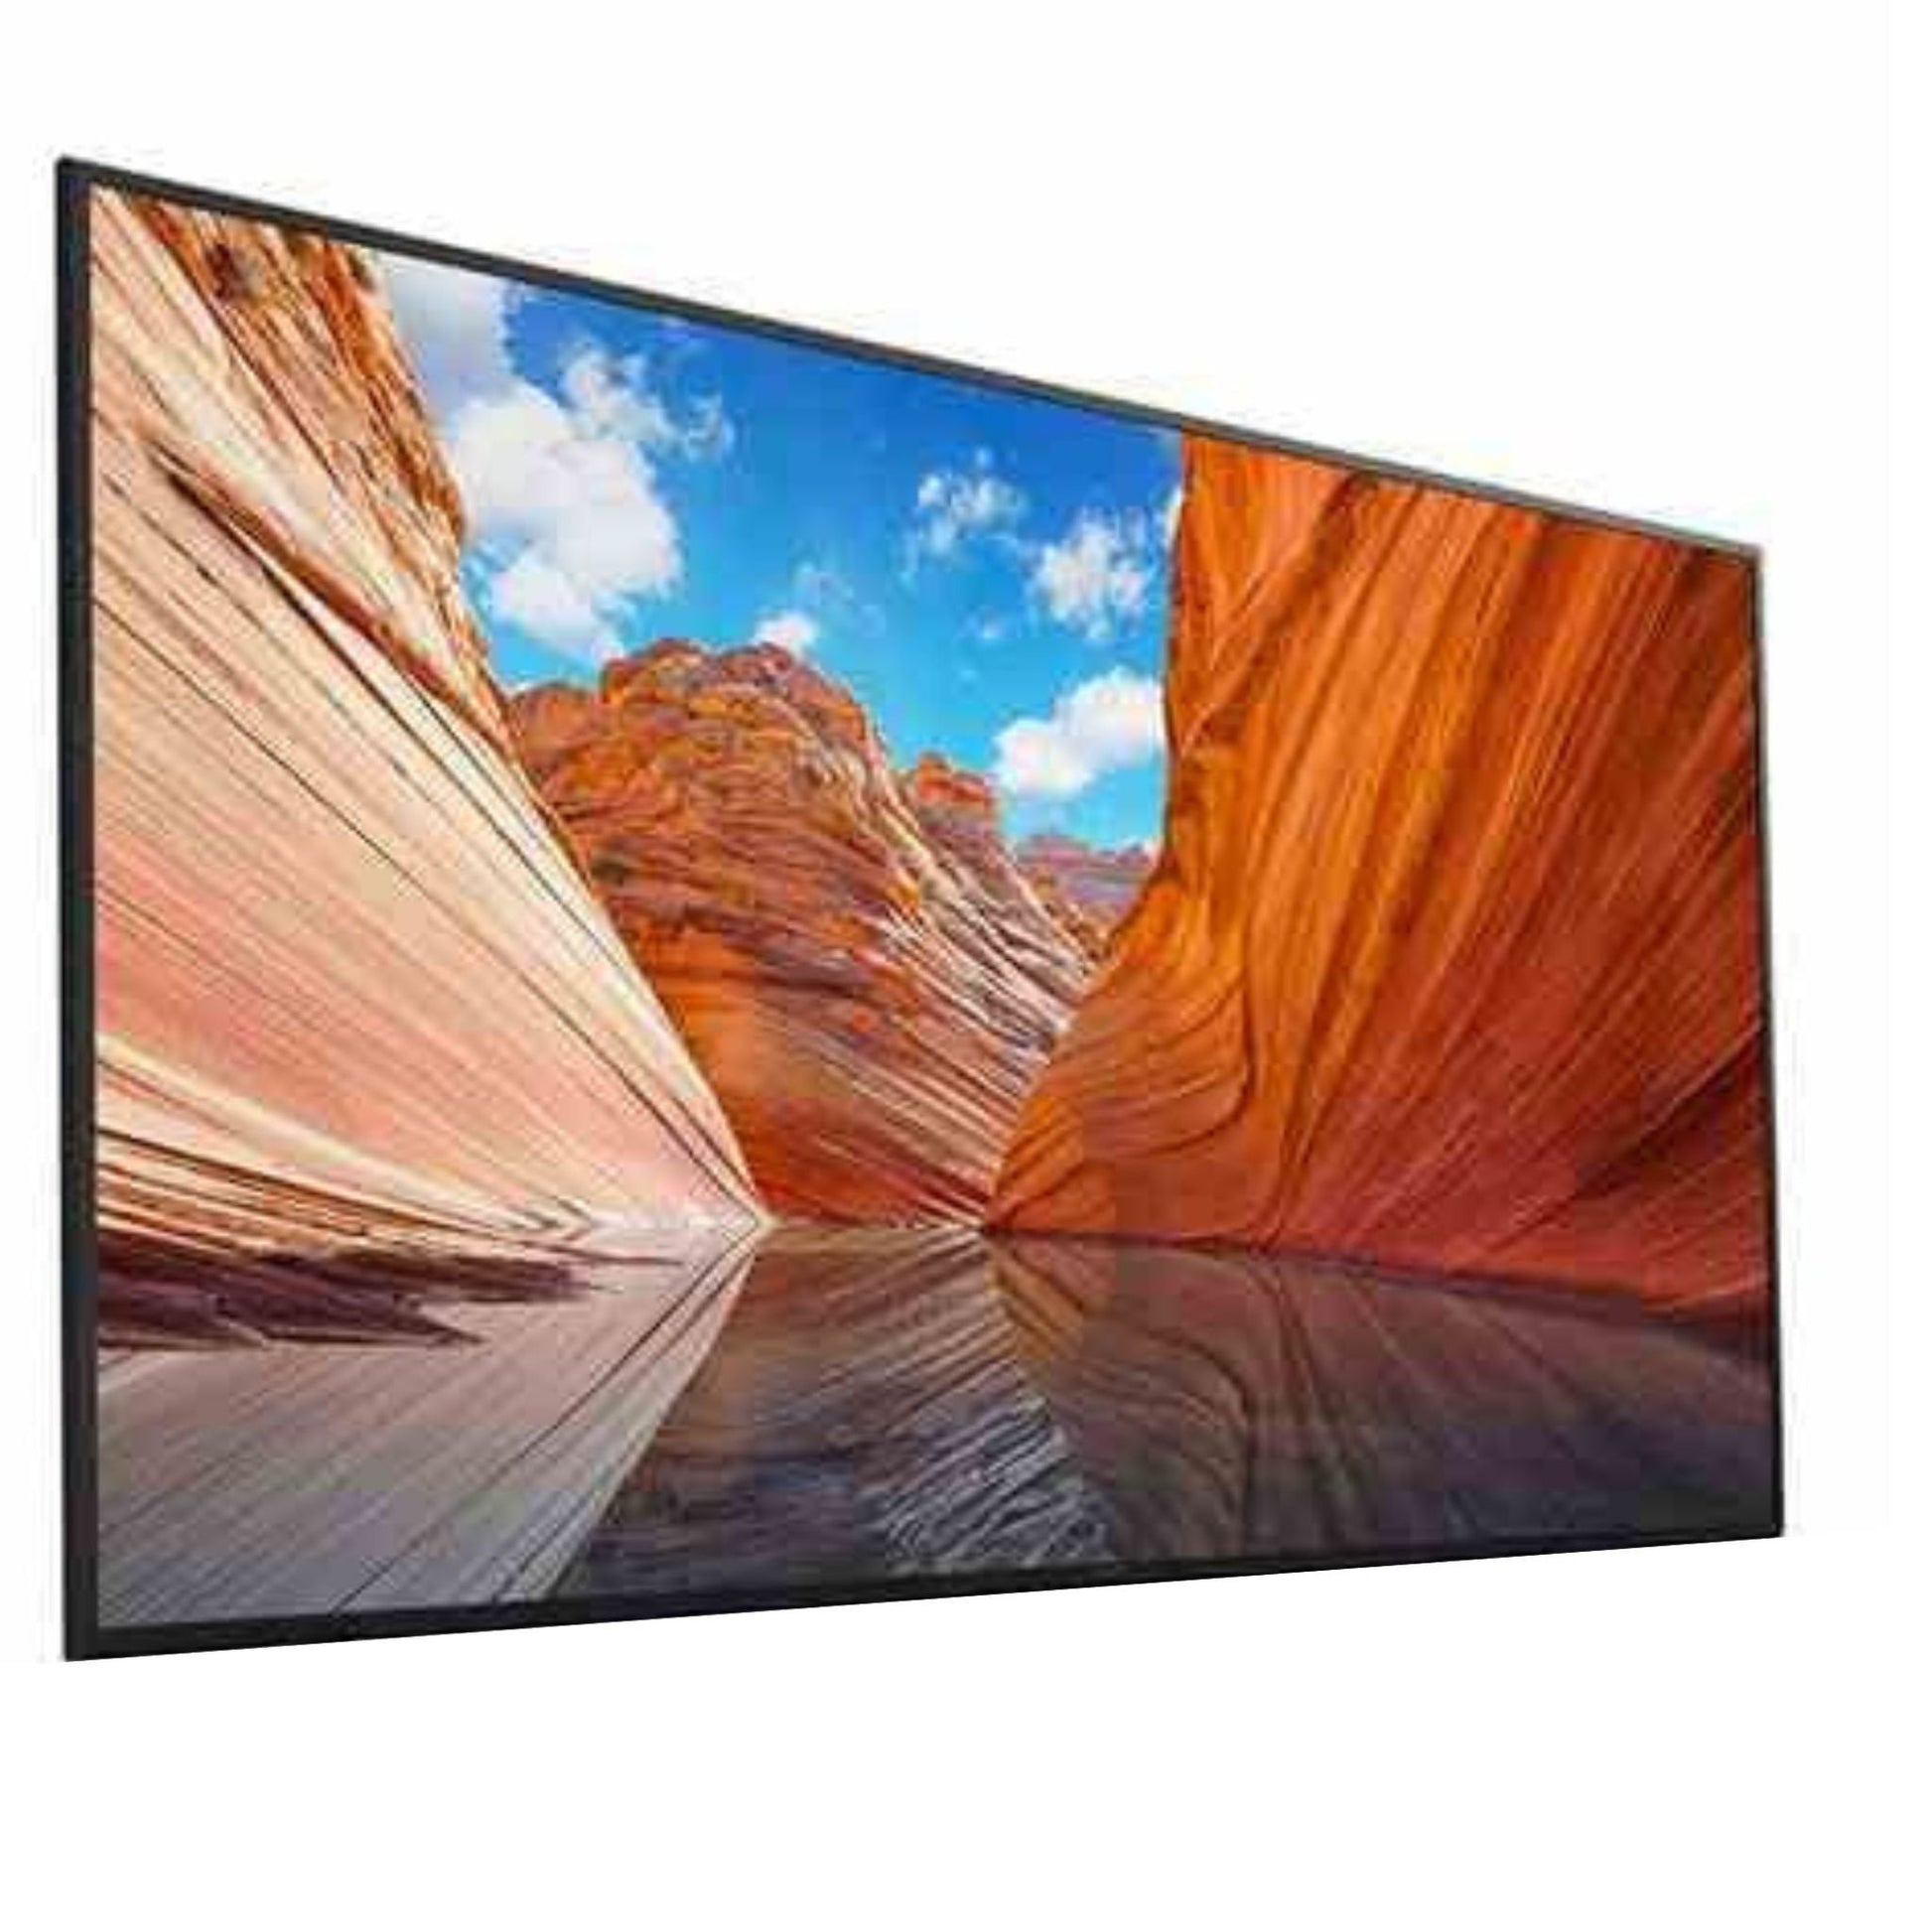 Sony 55 inch Smart Android TV, 55X80K